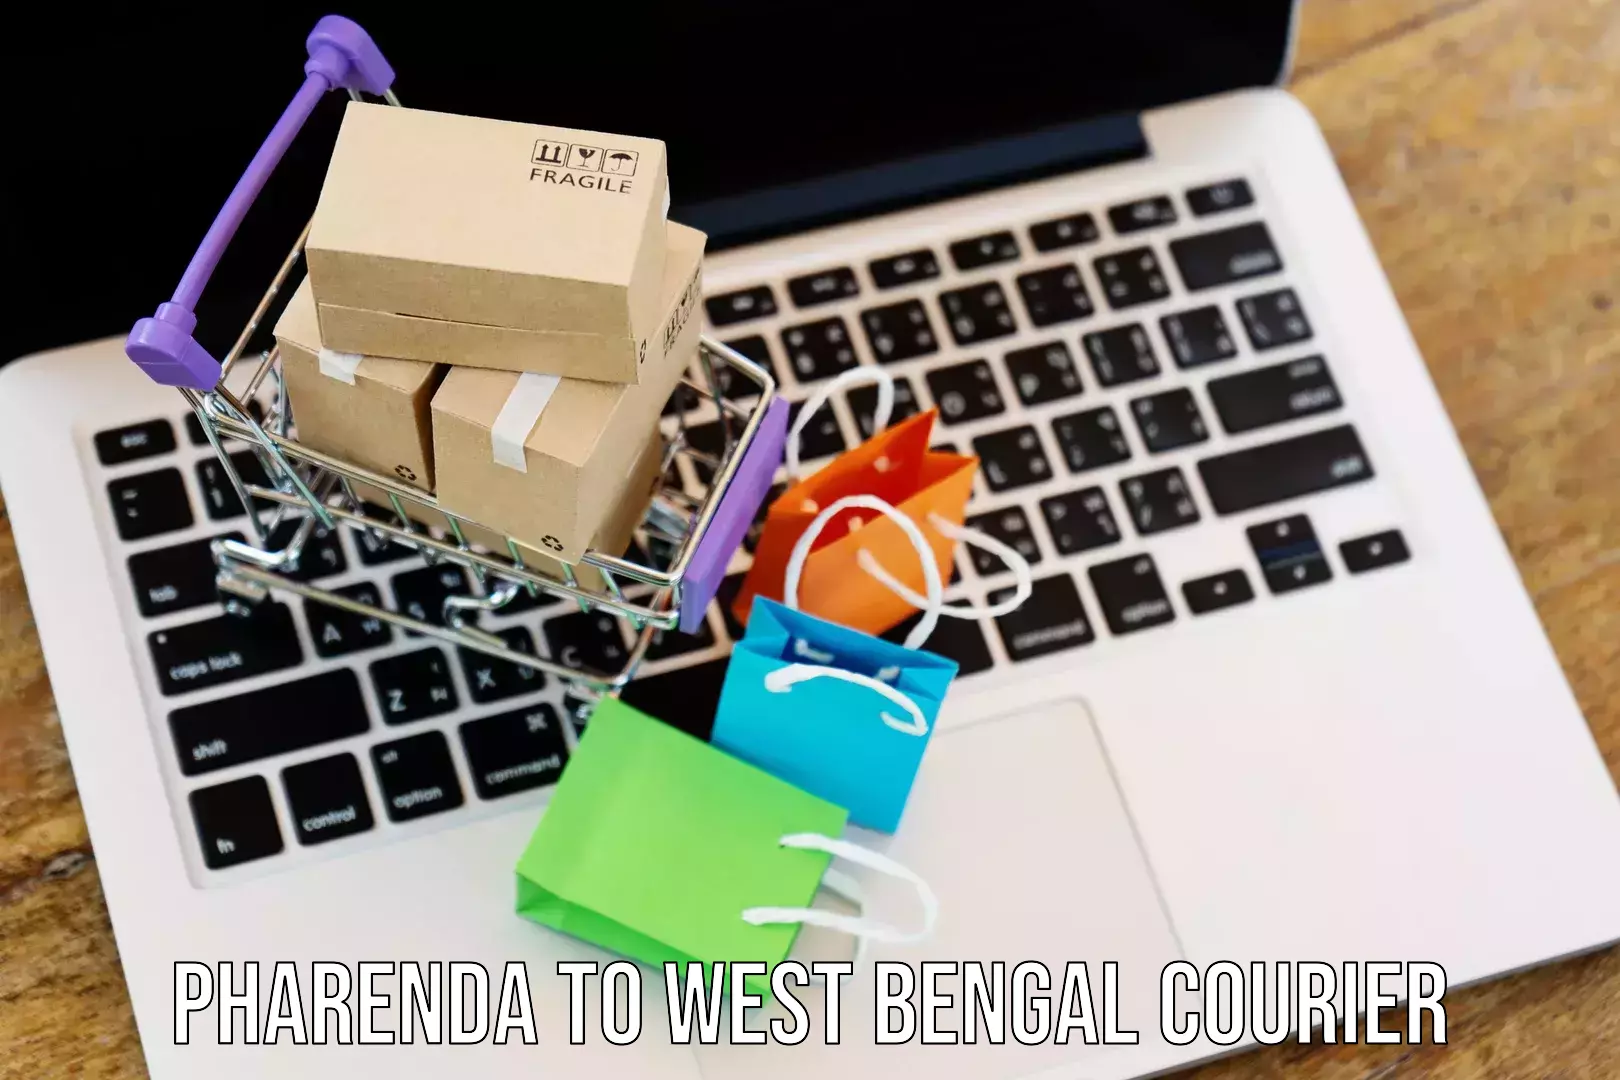 User-friendly delivery service Pharenda to Park Street